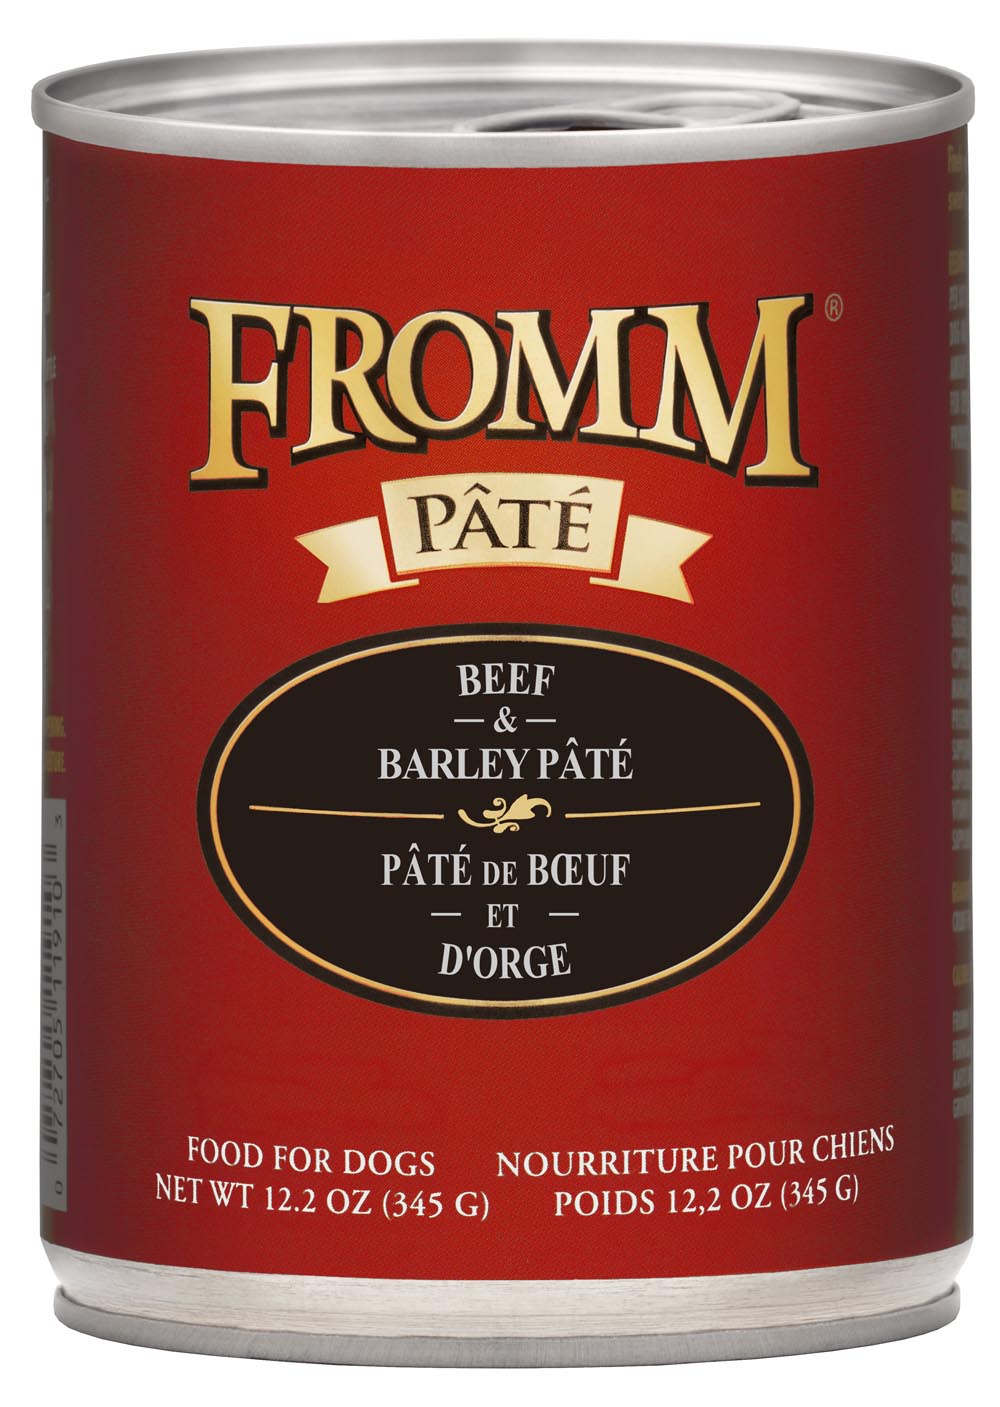 Fromm Beef & Barley Pate Food for Dogs, 12.2 OZ